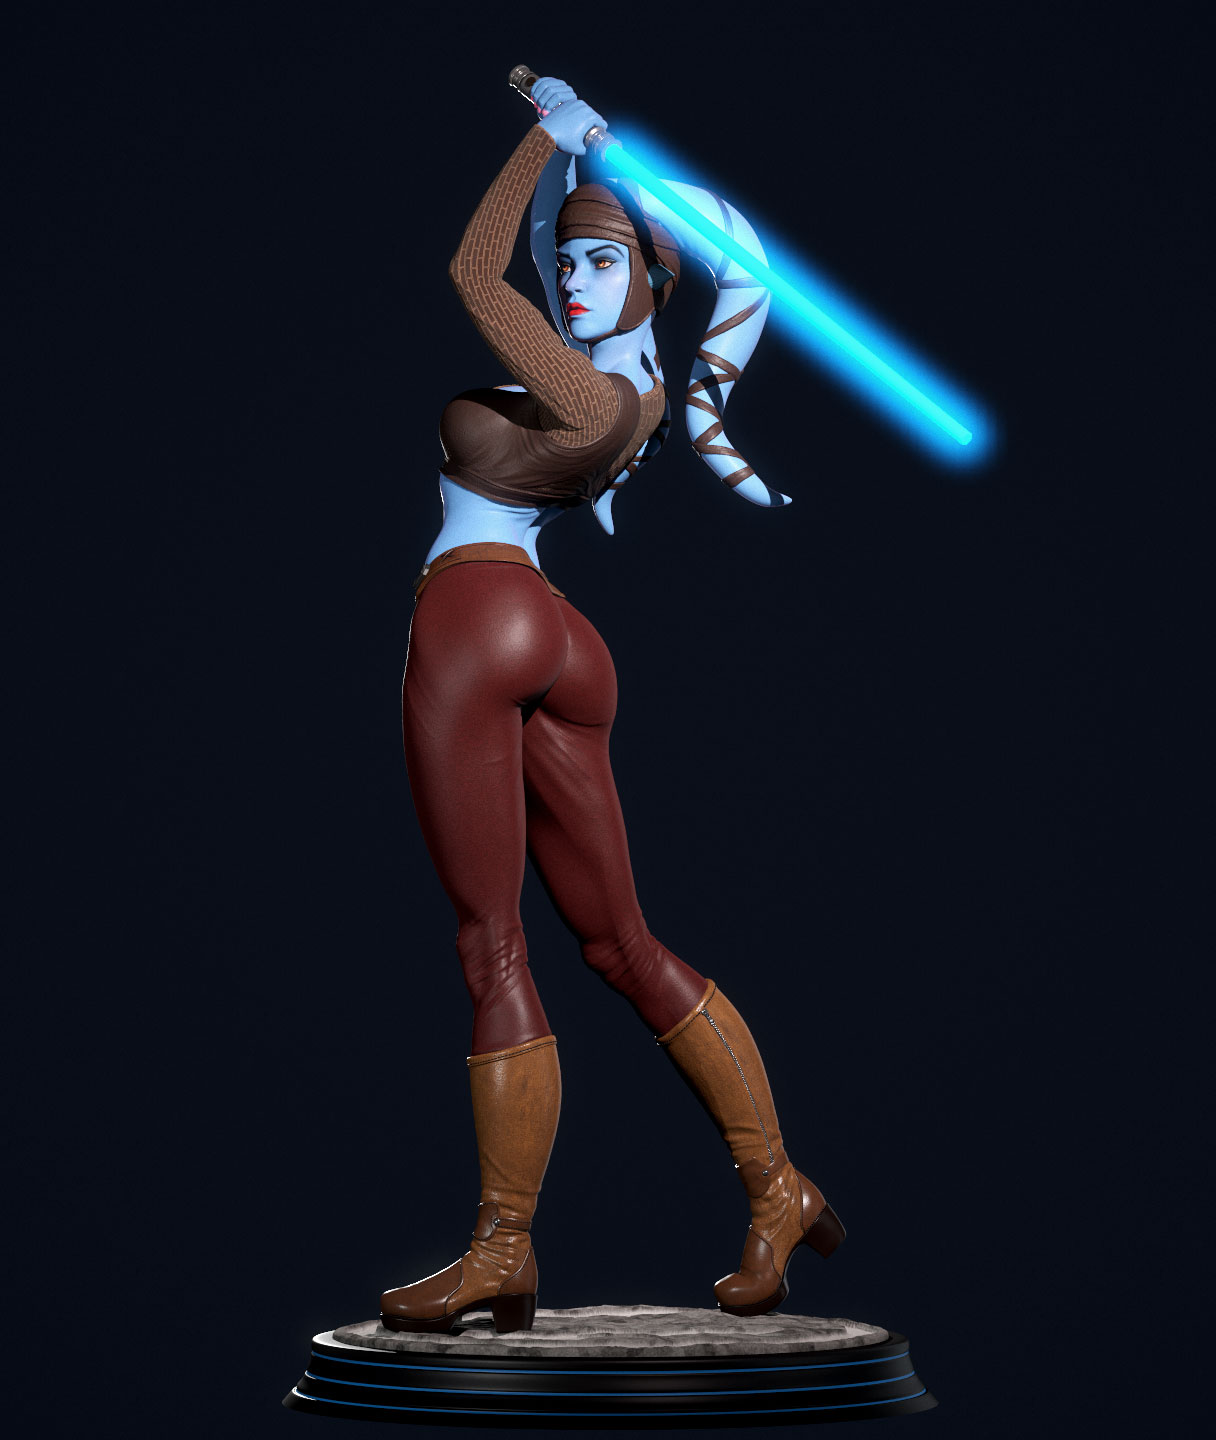 dan mandeville recommends aayla secura hot pic